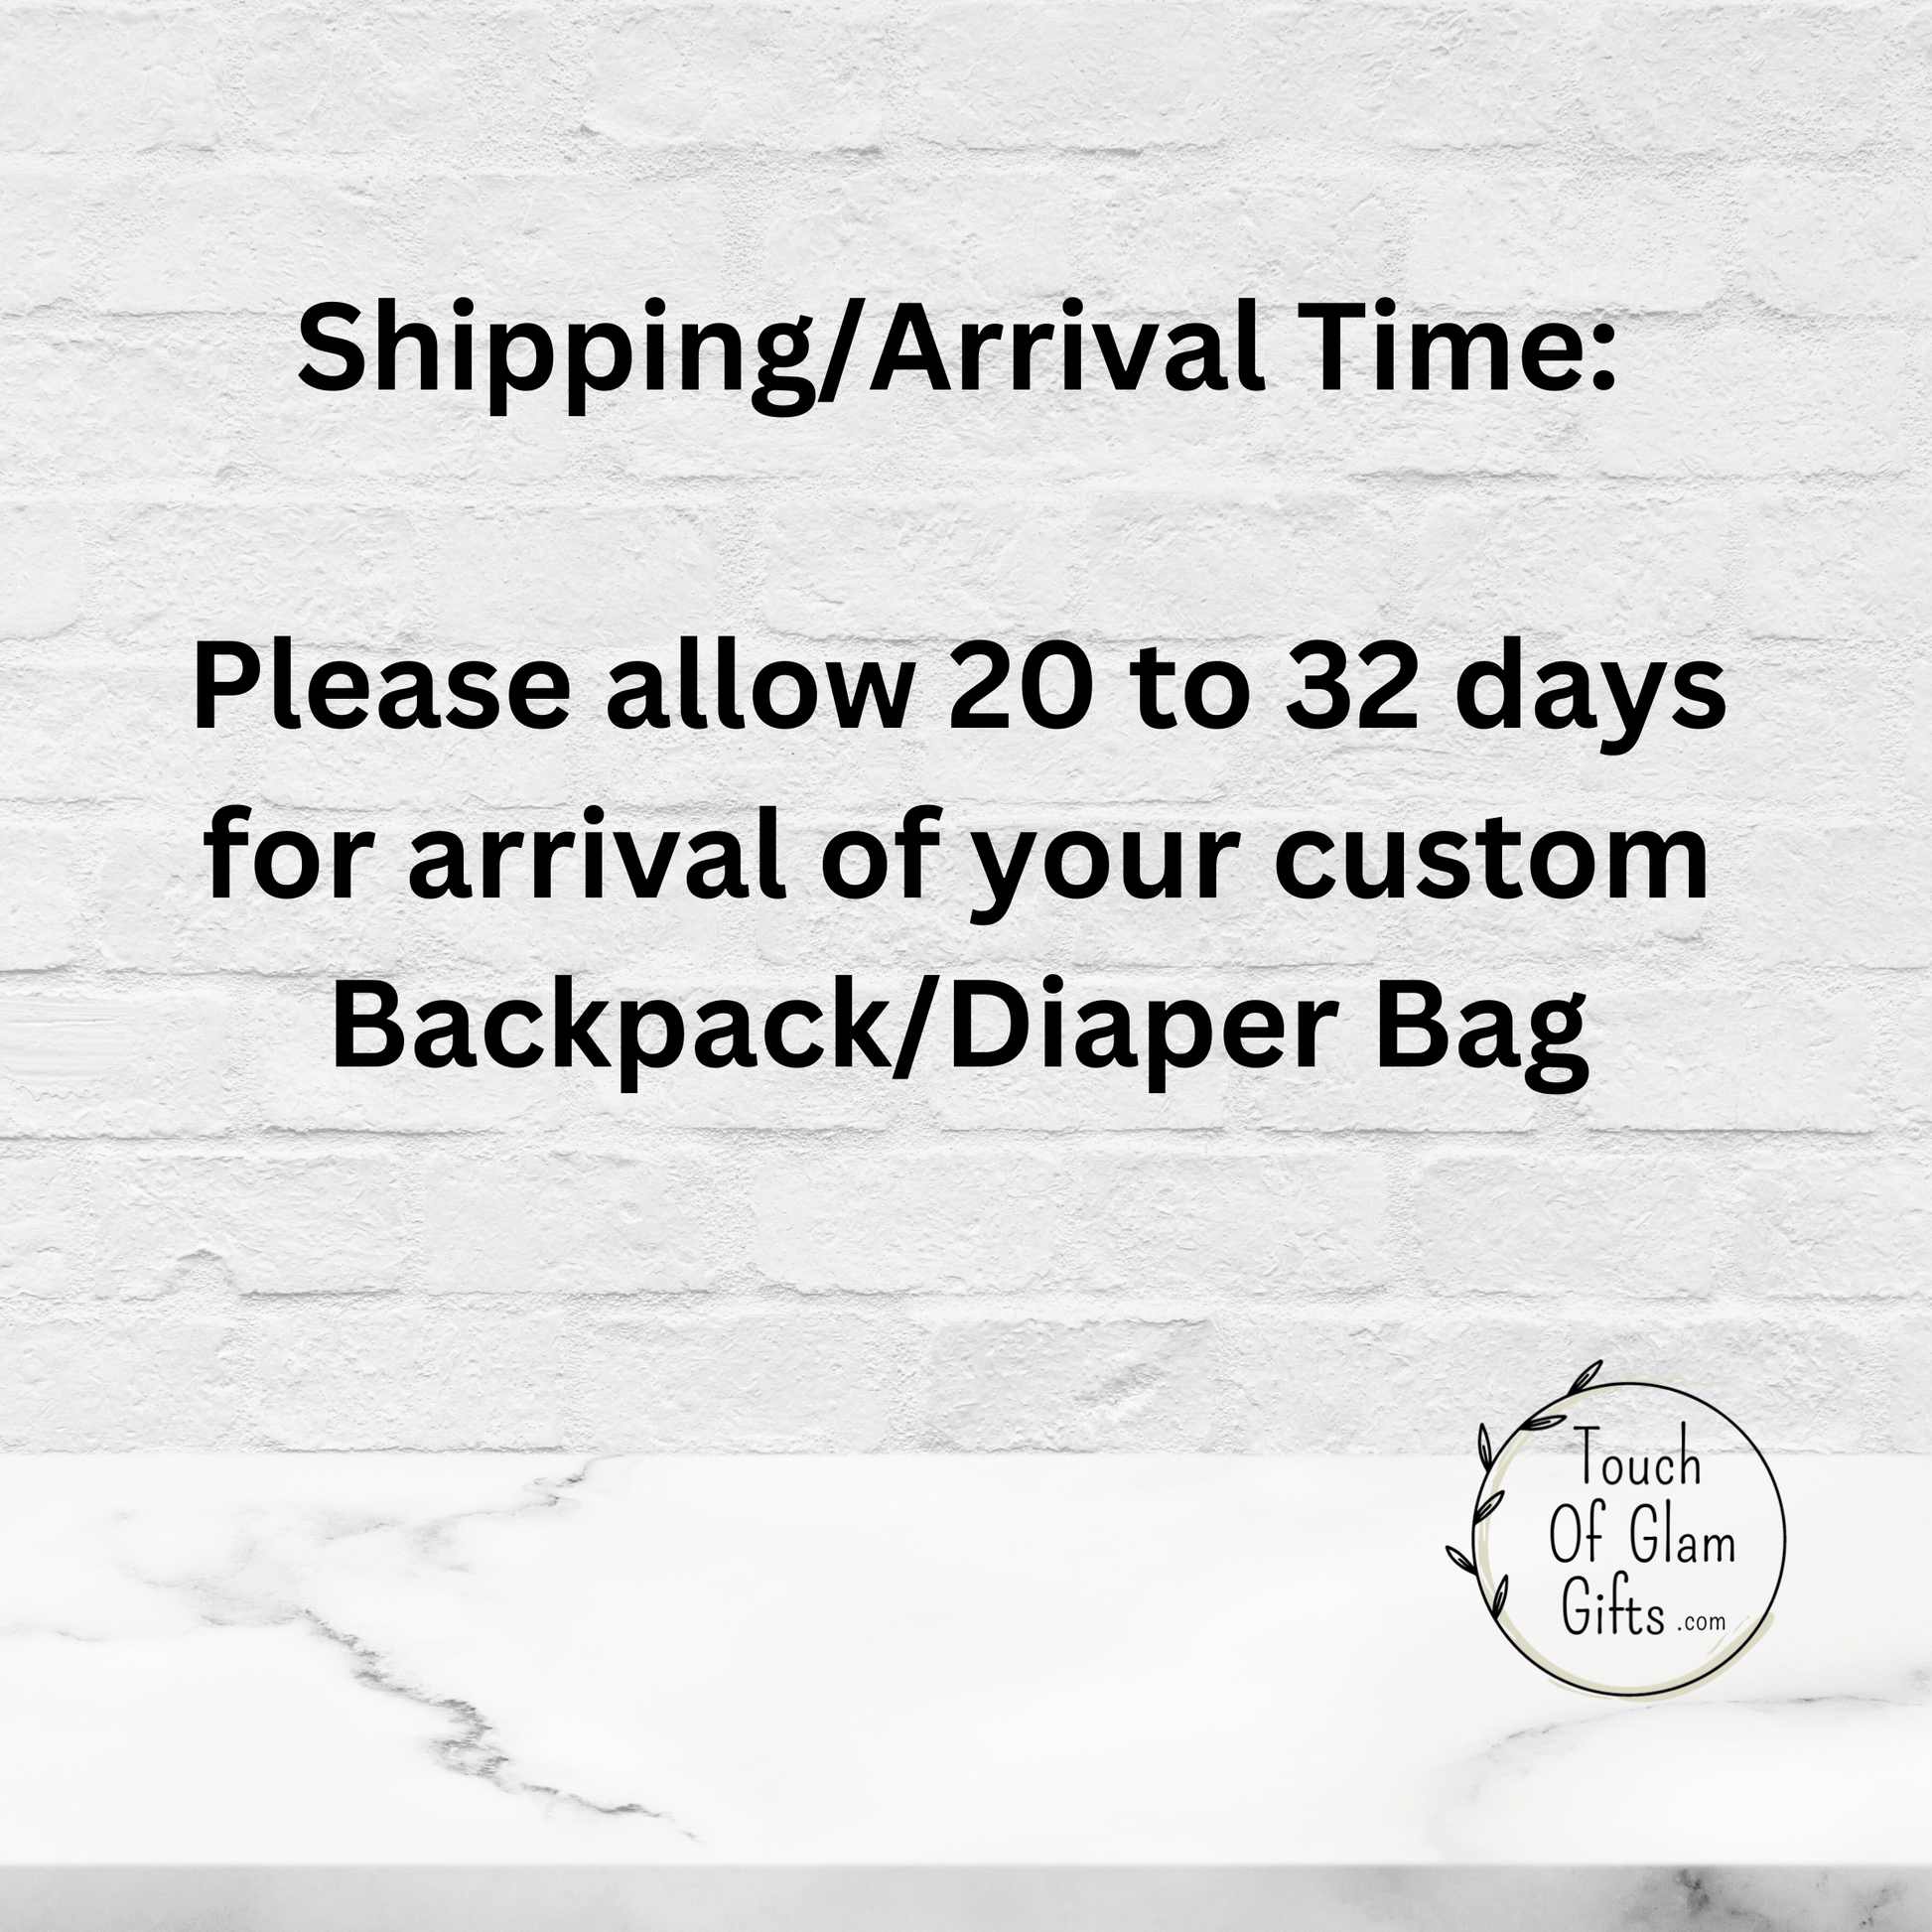 Shipping arrival time is to allow twenty to thirty two days for the arrival of your custom diaper bag backpack.